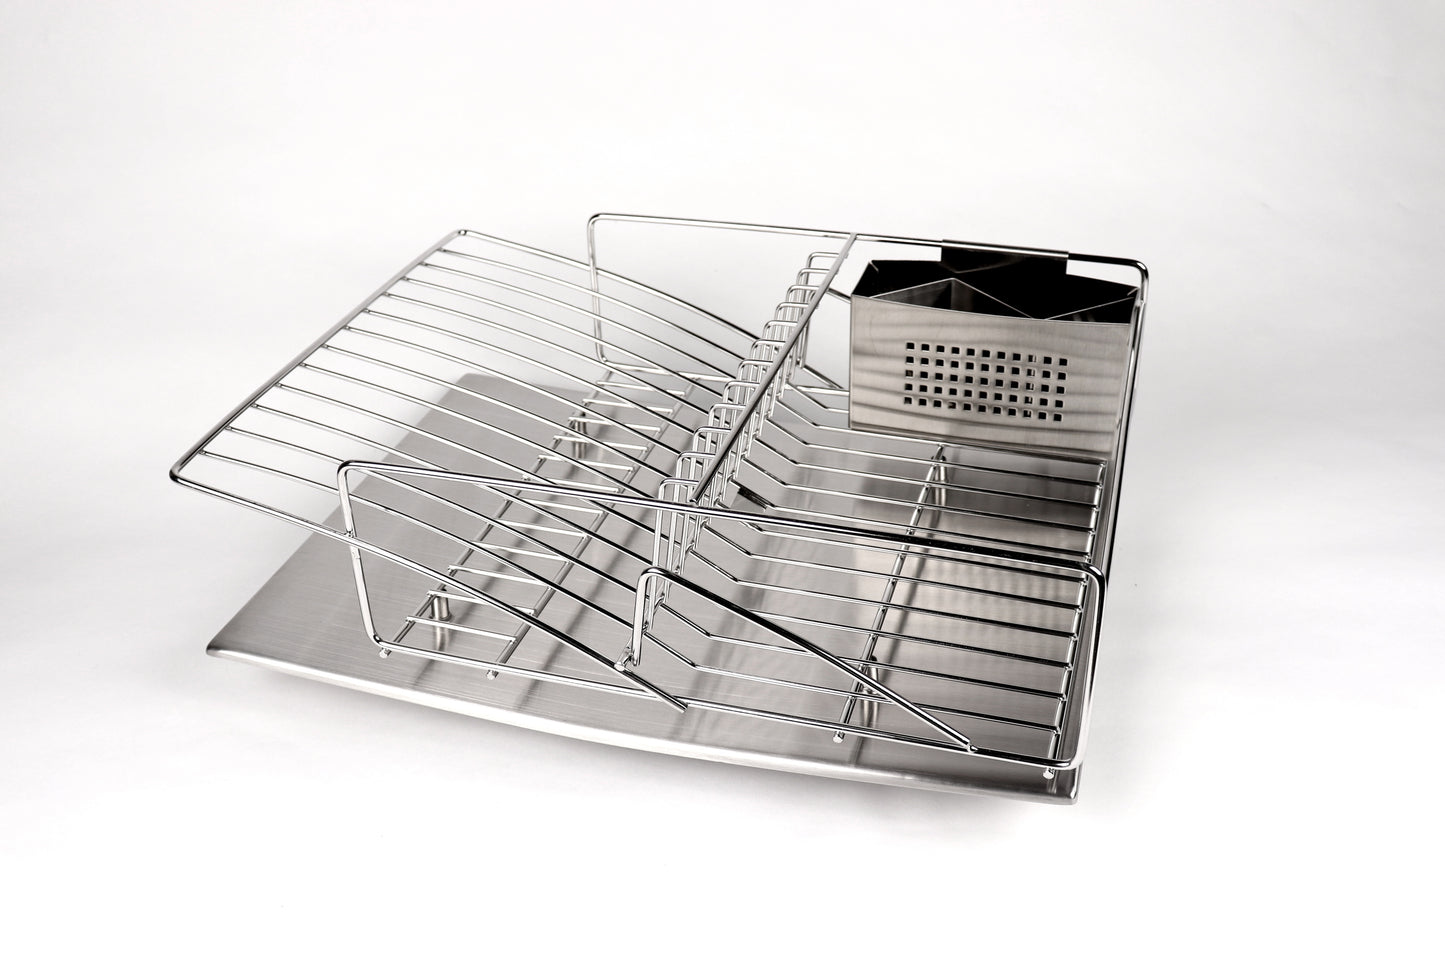 Zojila.com : Rohan Dish drainer, drain board, dish rack, cutlery holder and divider, all stainless, removable